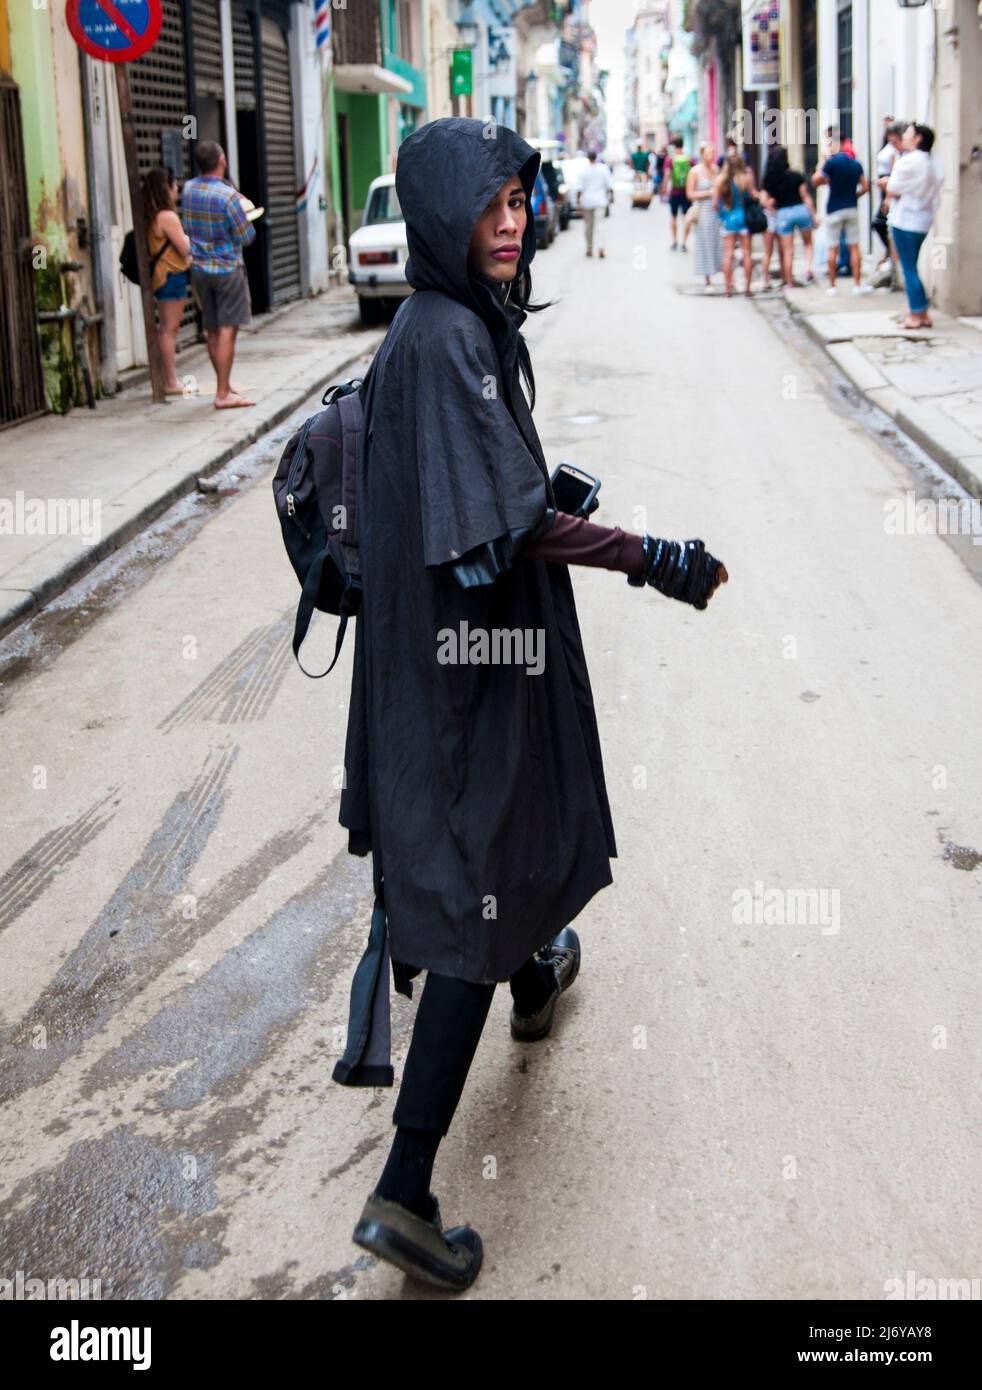 Drag Queen transexual with attitude walking through the middle of the street in Havana, Cuba. Stock Photo